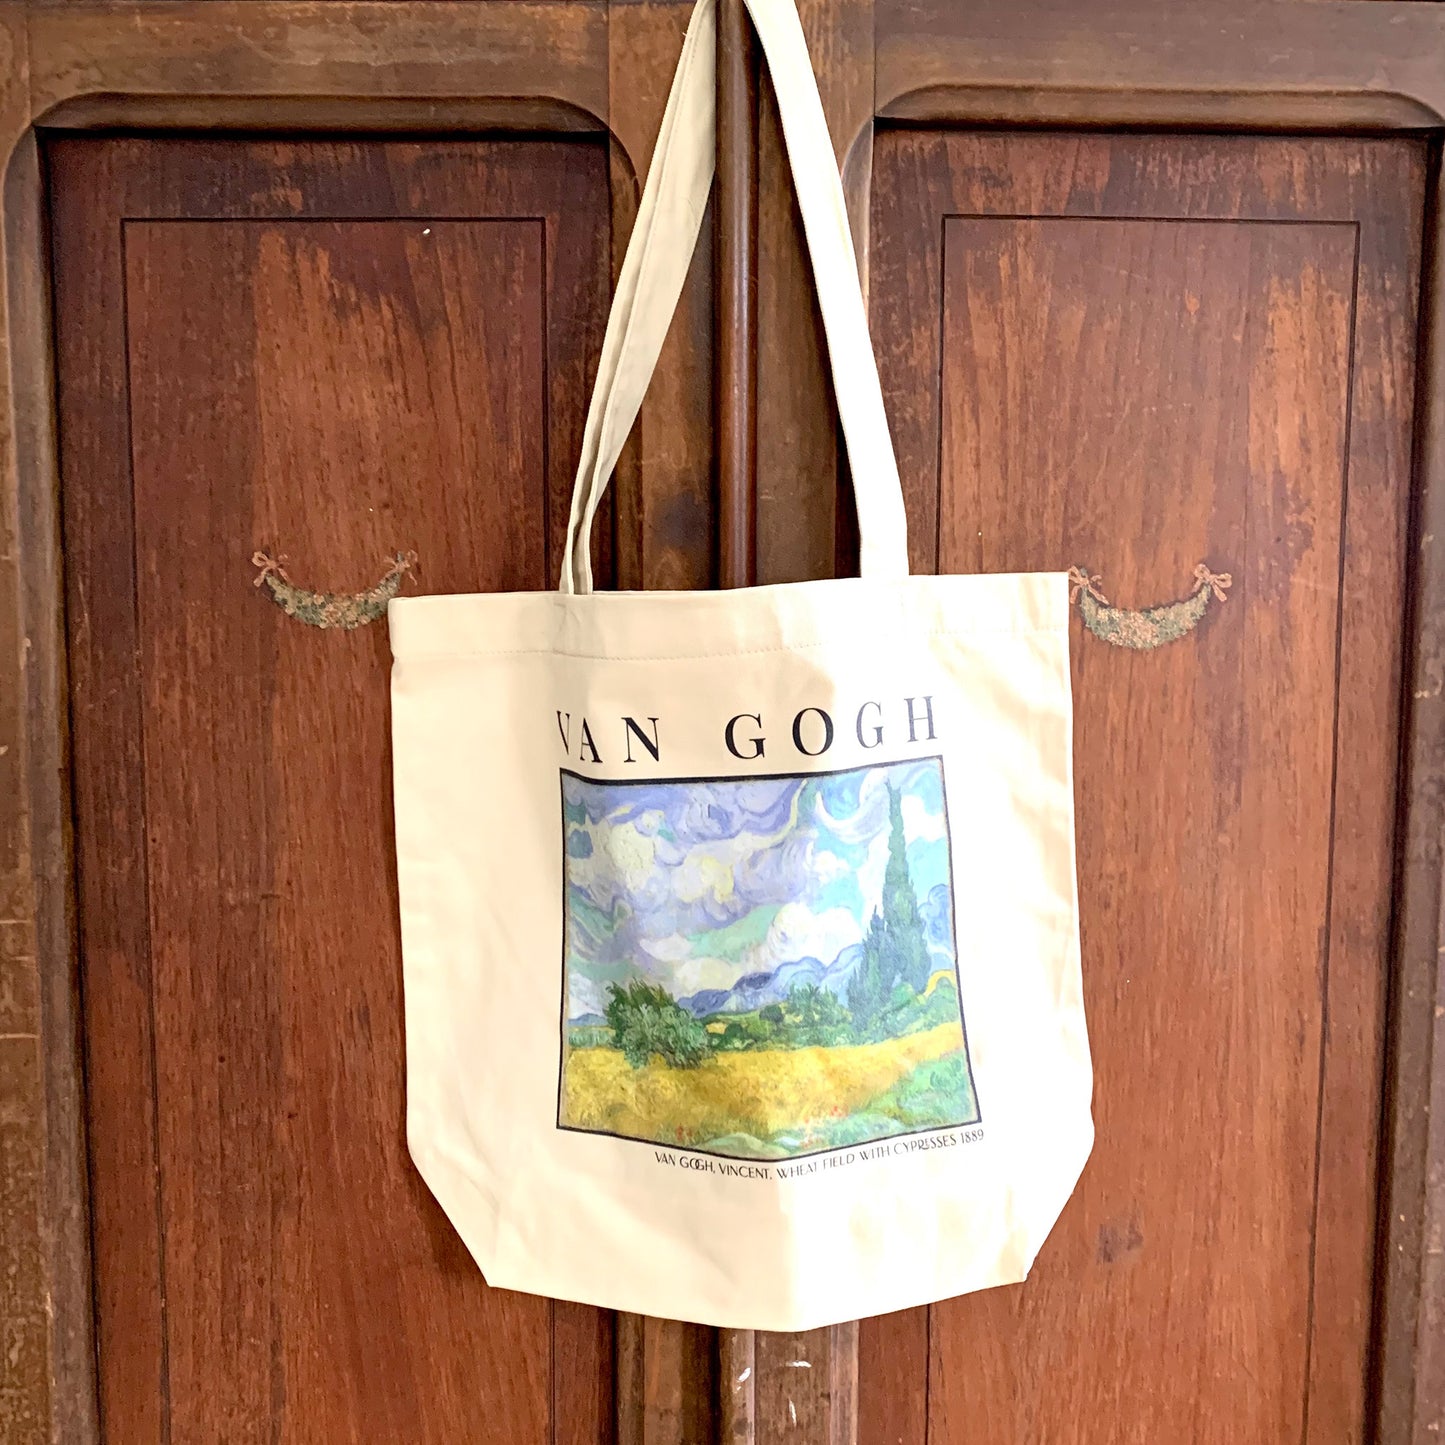 Vincent van Gogh Wheat Field With Cypresses print on an eco friendly market tote bag